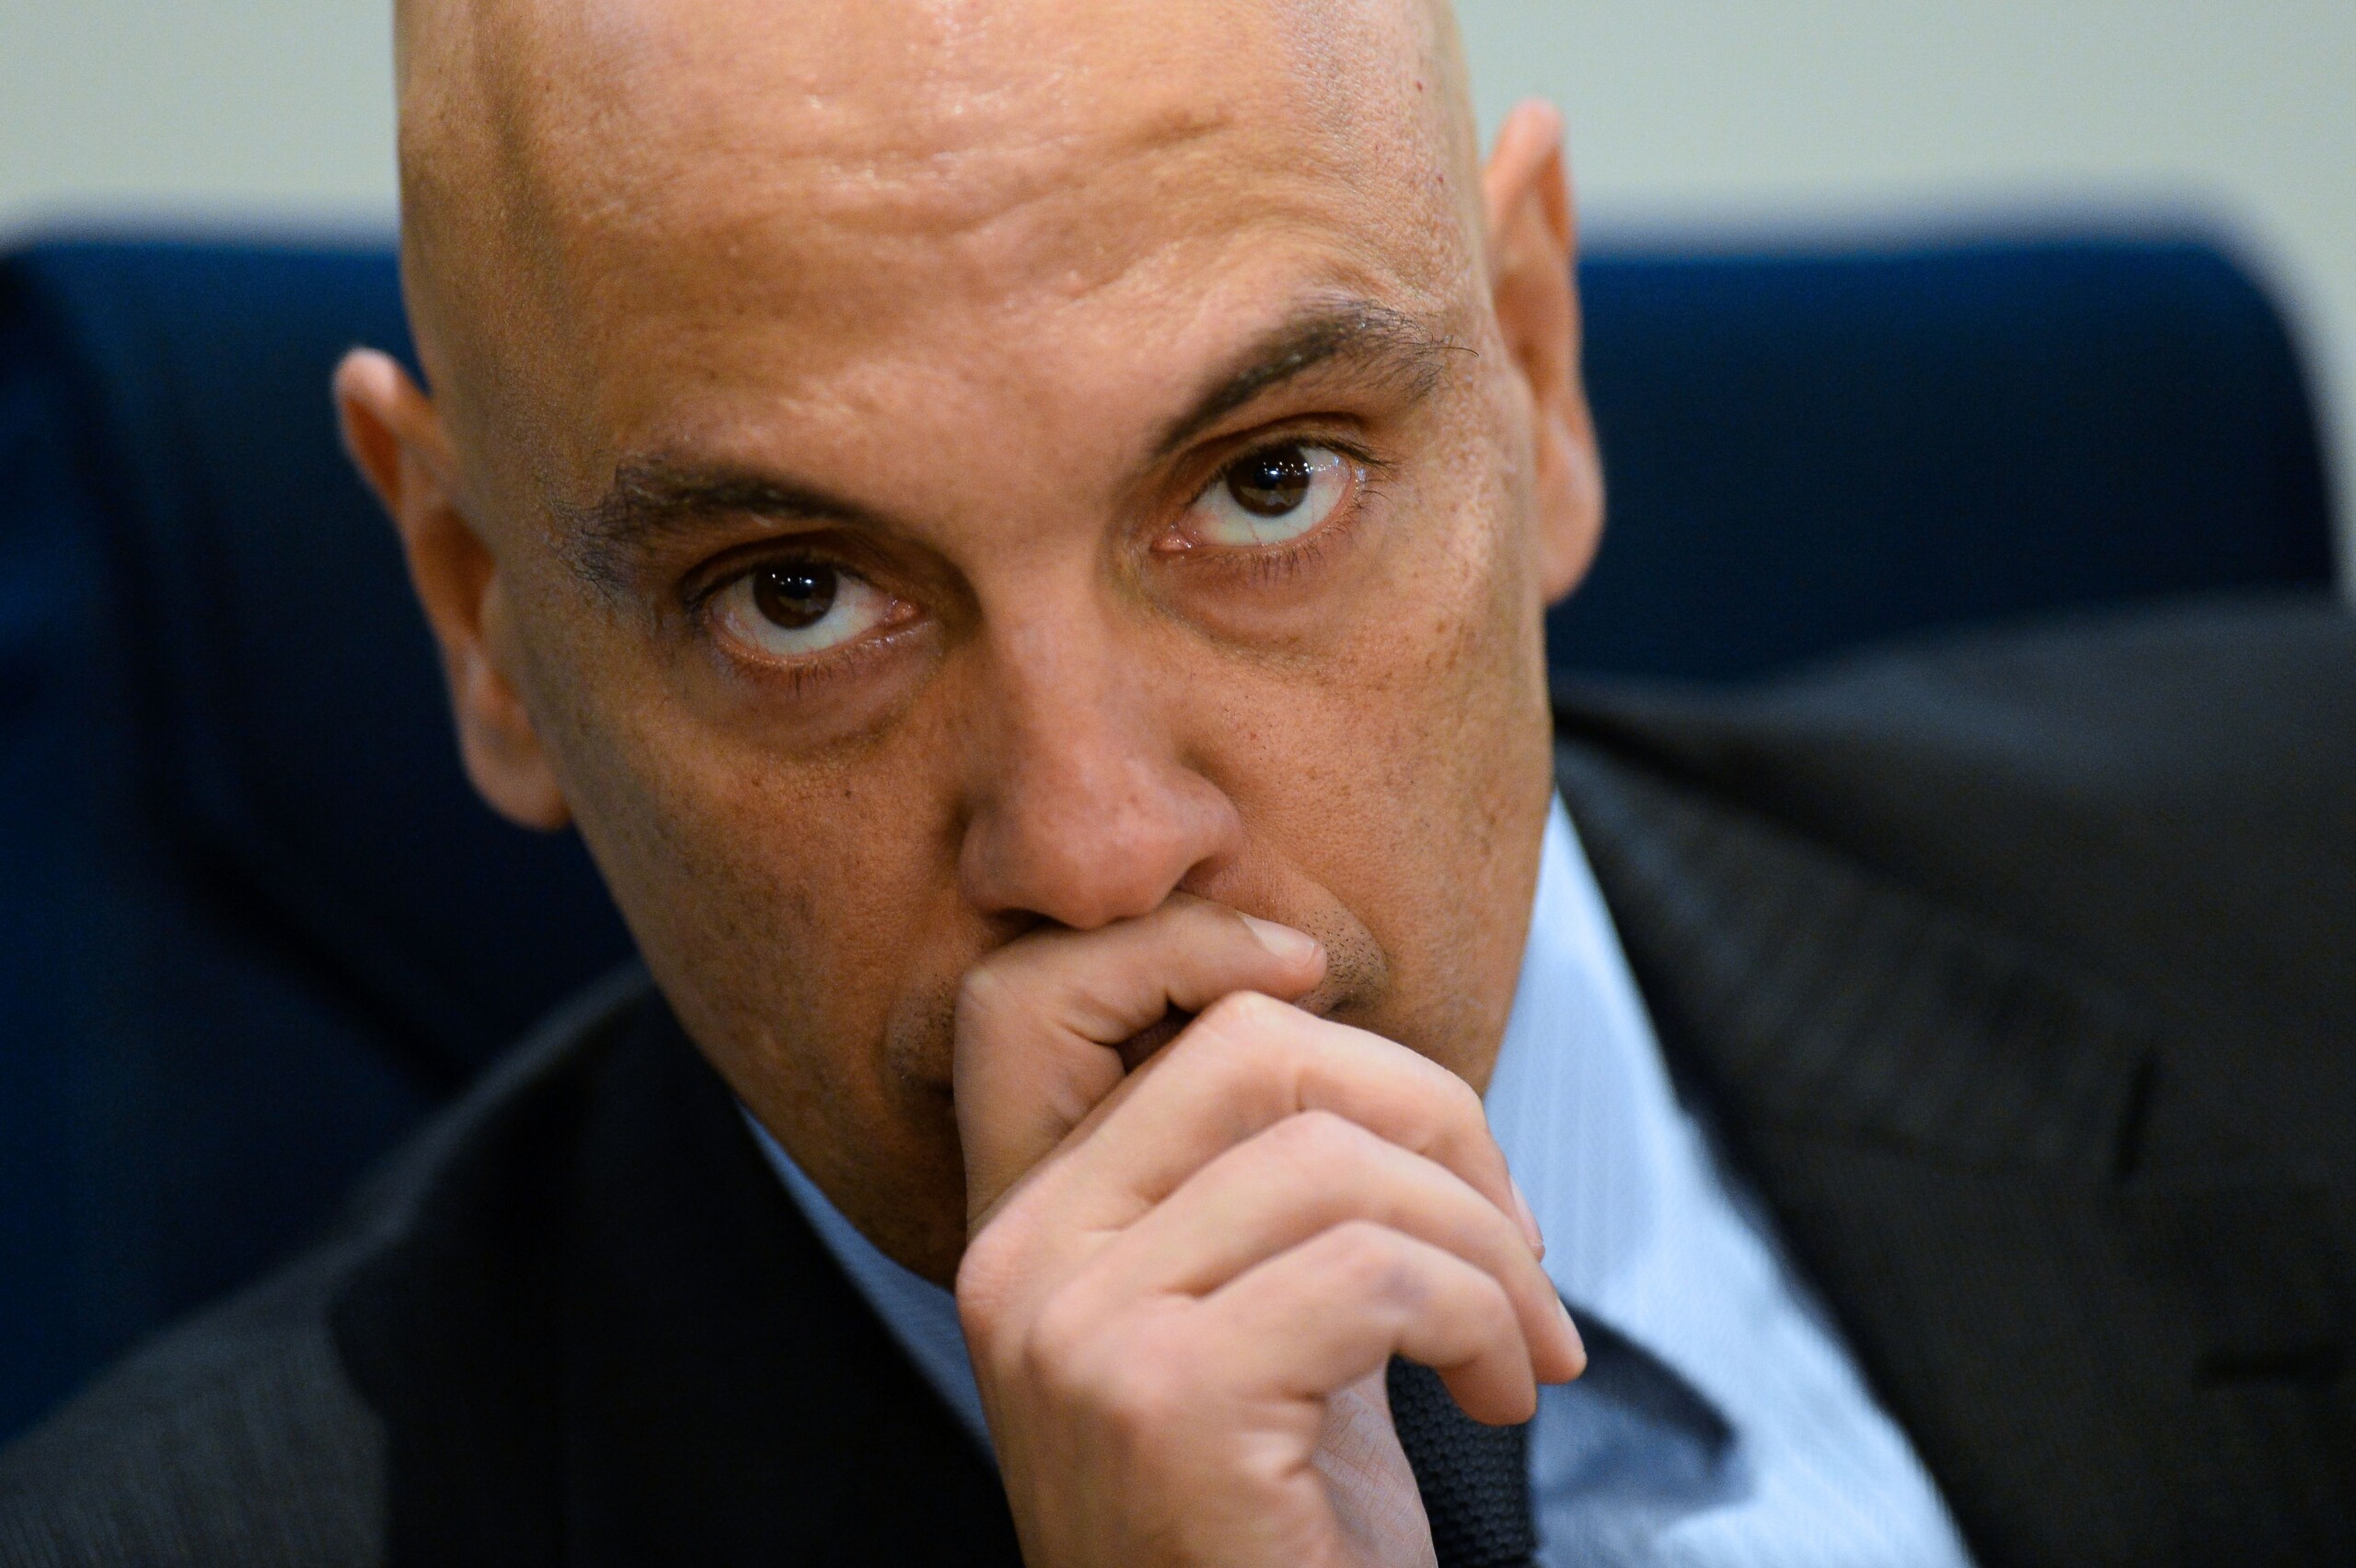 Brazilian Justice Minister Alexandre de Moraes attends the inauguratioon ceremony of International Police Cooperation Center (CCPI) in Brasilia, on August 1, 2016.<br /><br /><br /><br /><br /><br />
The centre will work during the Olympic and Paralympic Games in Rio de Janeiro, which will take place from August 5-21 and September 7-18 respectively..  / AFP / ANDRESSA ANHOLETE        (Photo credit should read ANDRESSA ANHOLETE/AFP/Getty Images)